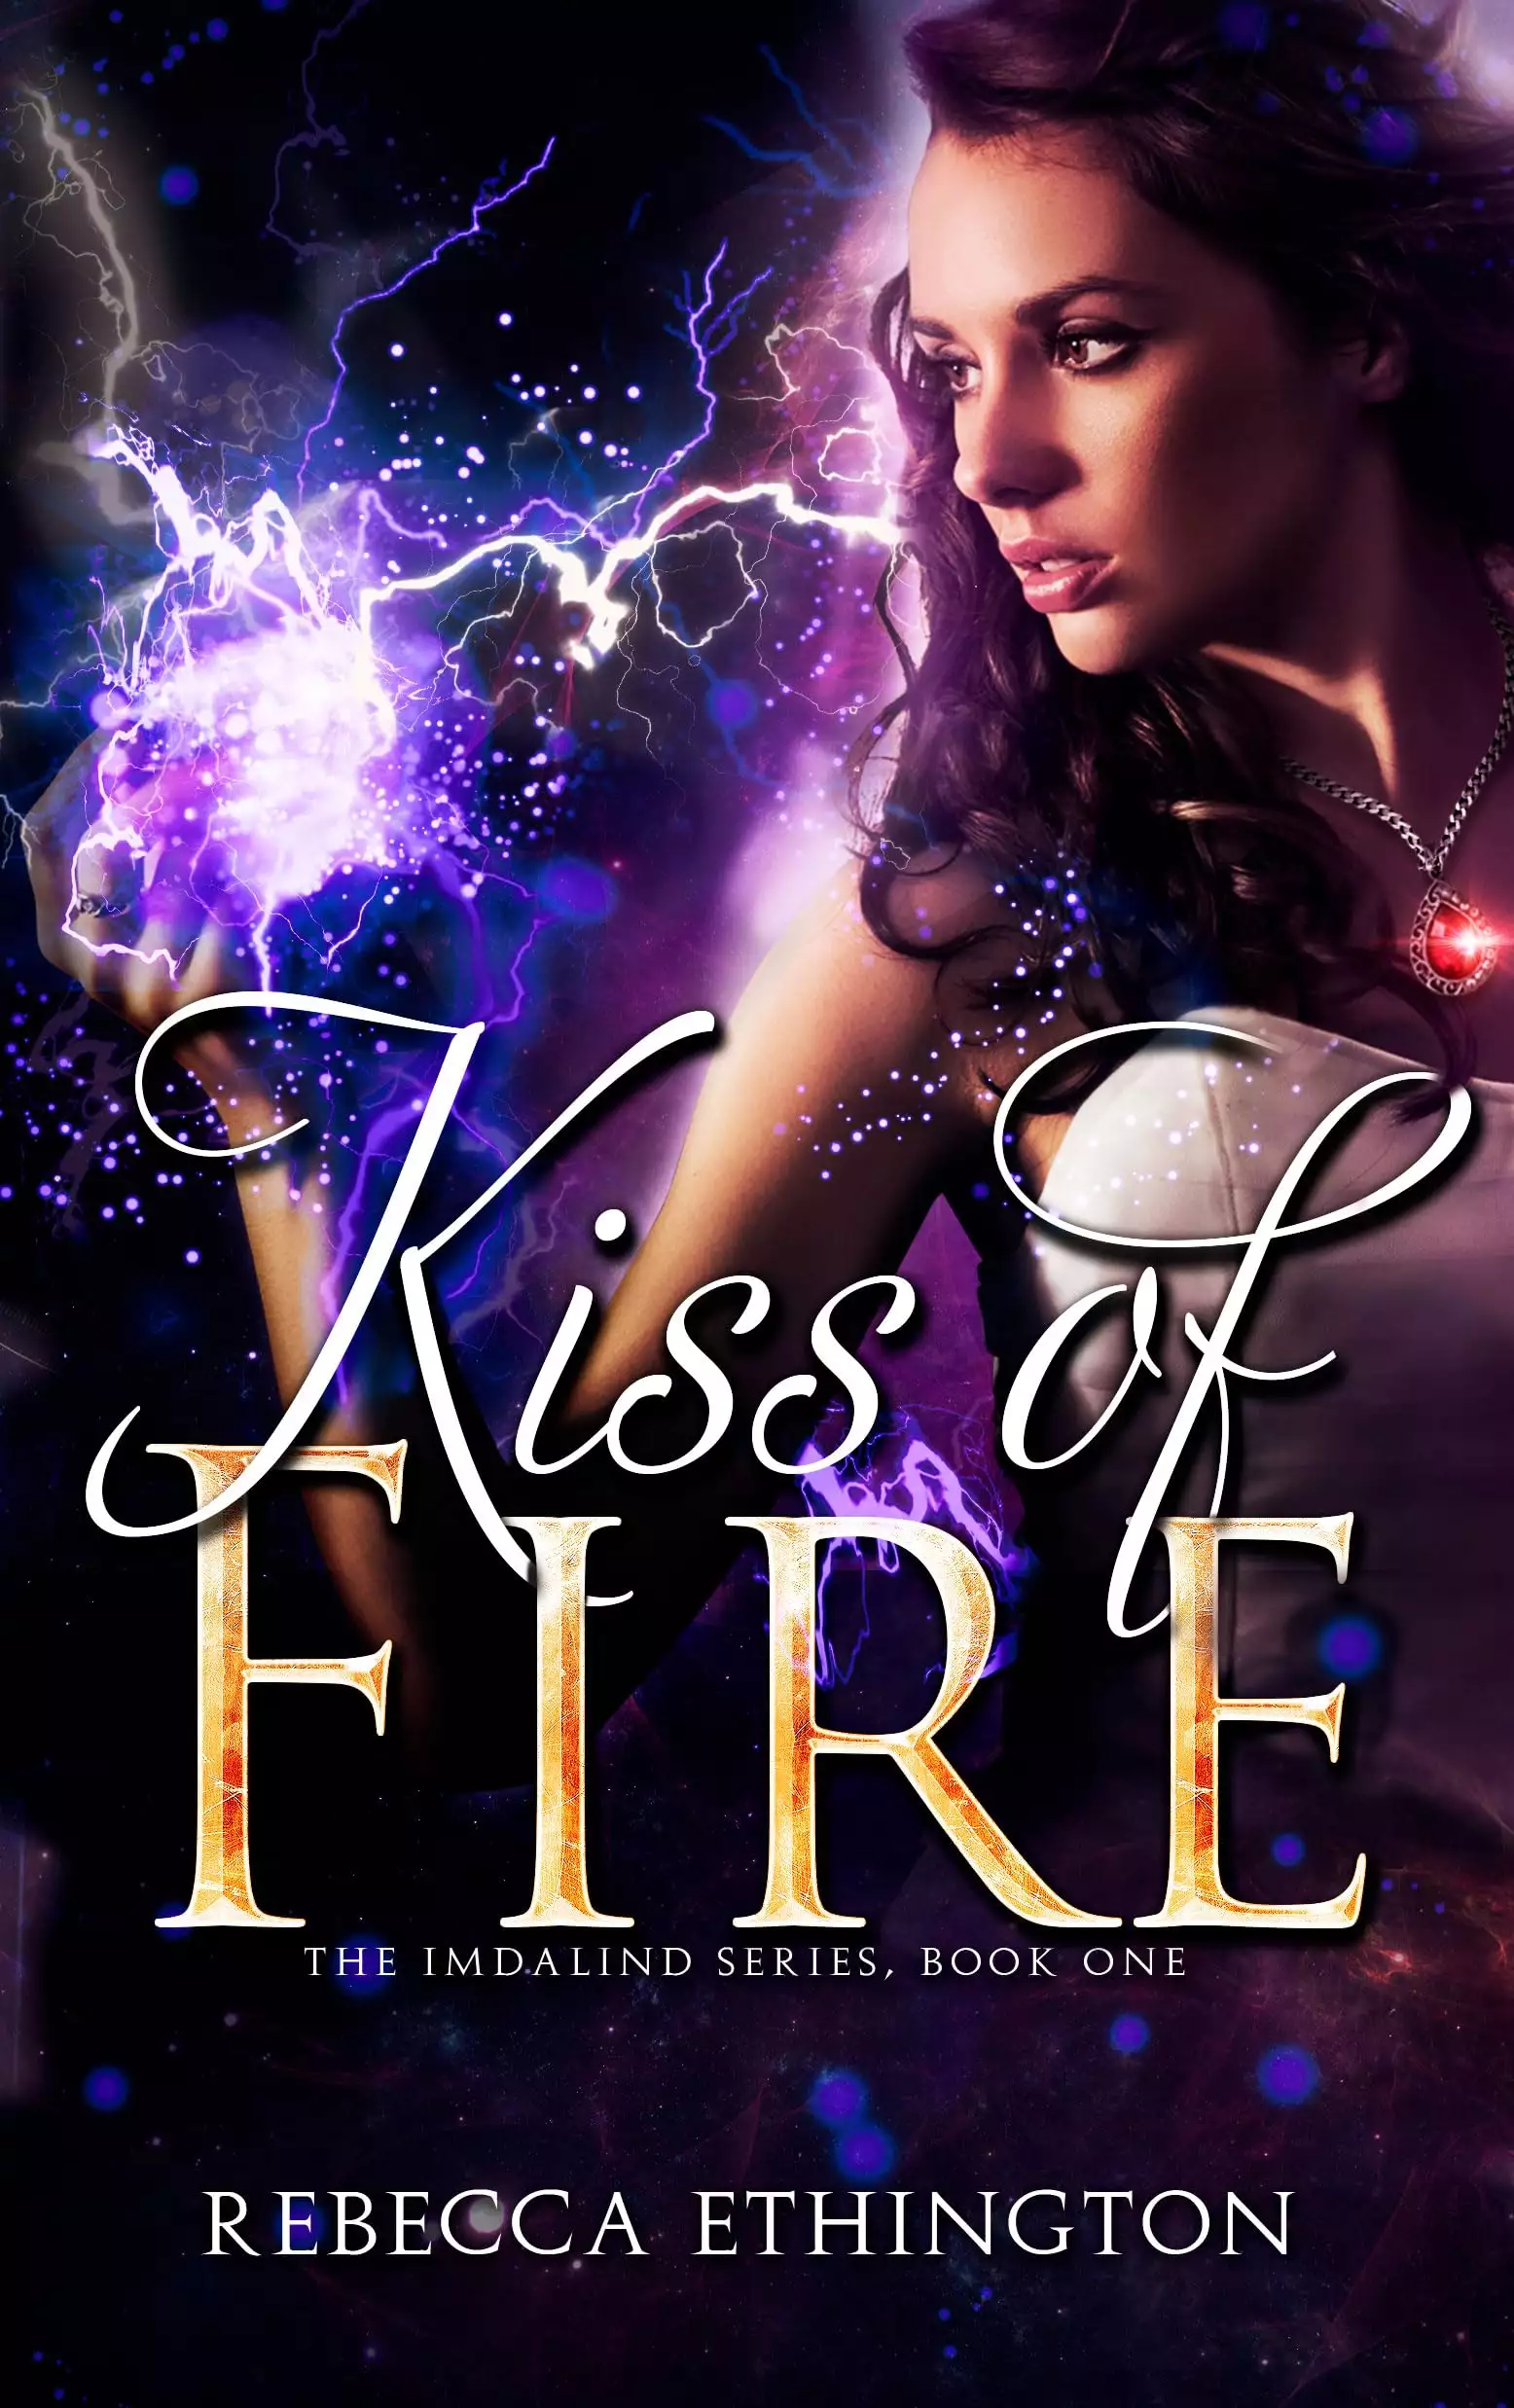 Kiss Of Fire